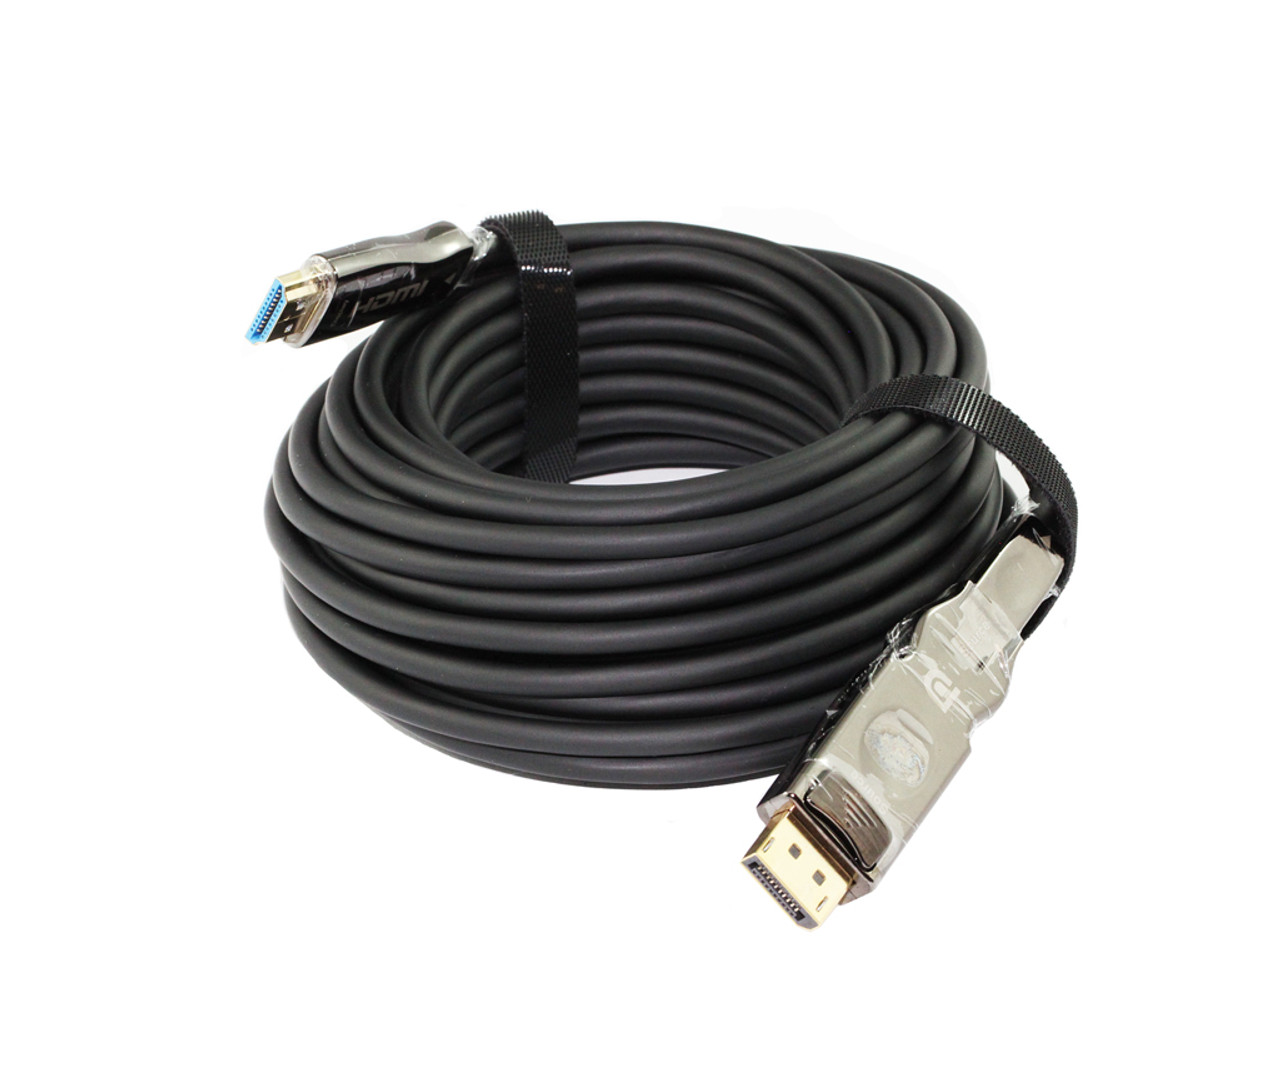 15M Displayport 1.2 to HDMI 2.0 AOC Cable supports 18Gbps, 4K@60Hz, 4:4:4